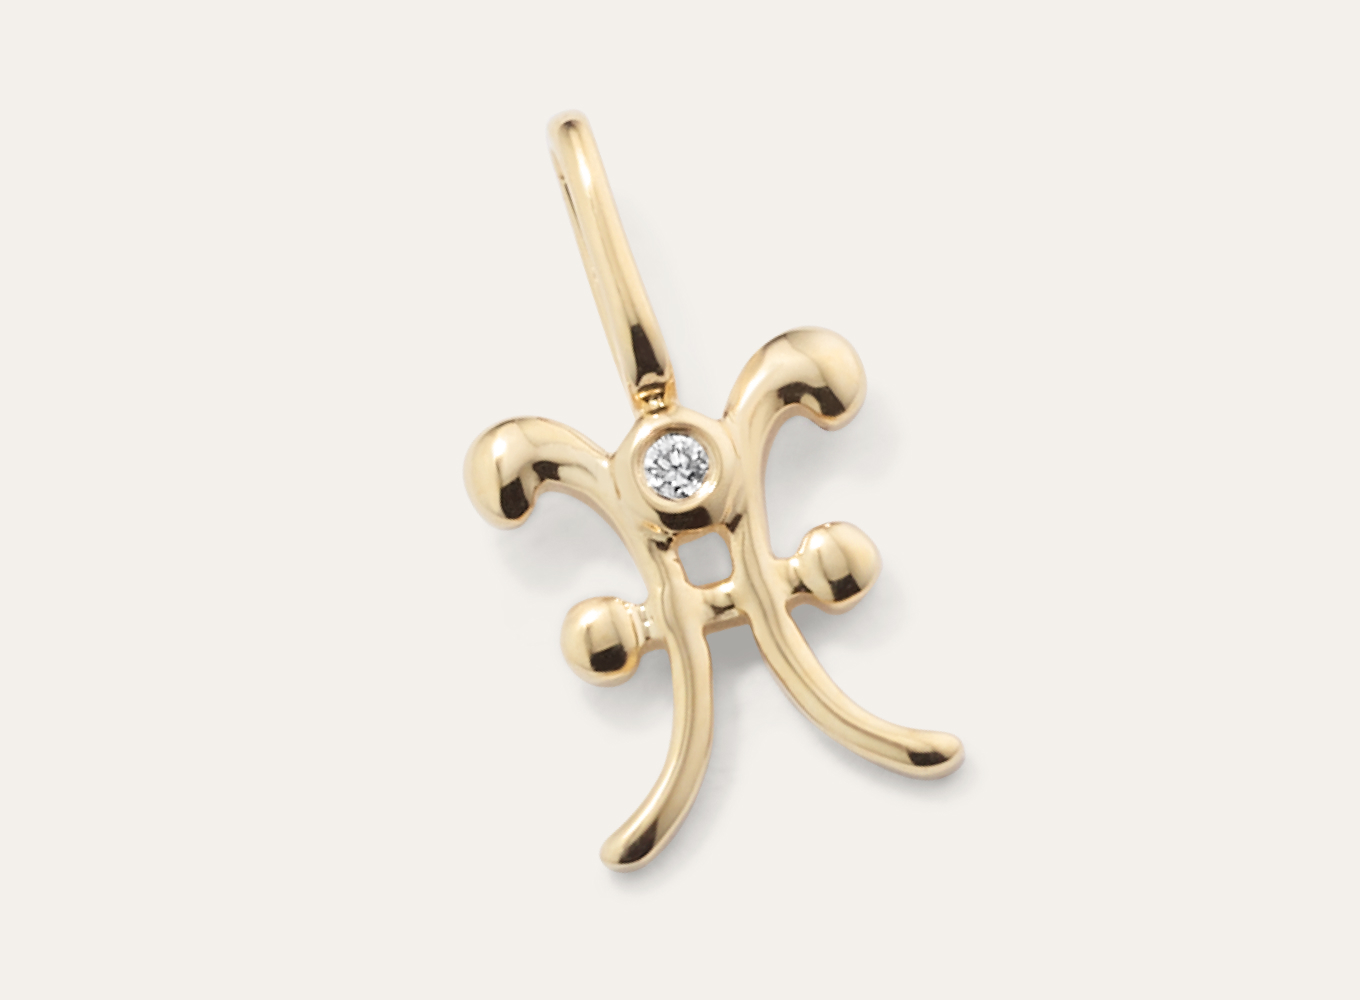 Pisces Sign Diamond Charm This 14-karat yellow gold zodiac charm, featuring the symbol for Pisces, makes a great gift or daily accessory. It has a natural diamond accent, offering a touch of sparkle. Add a chain to create a beautiful and meaningful necklace.